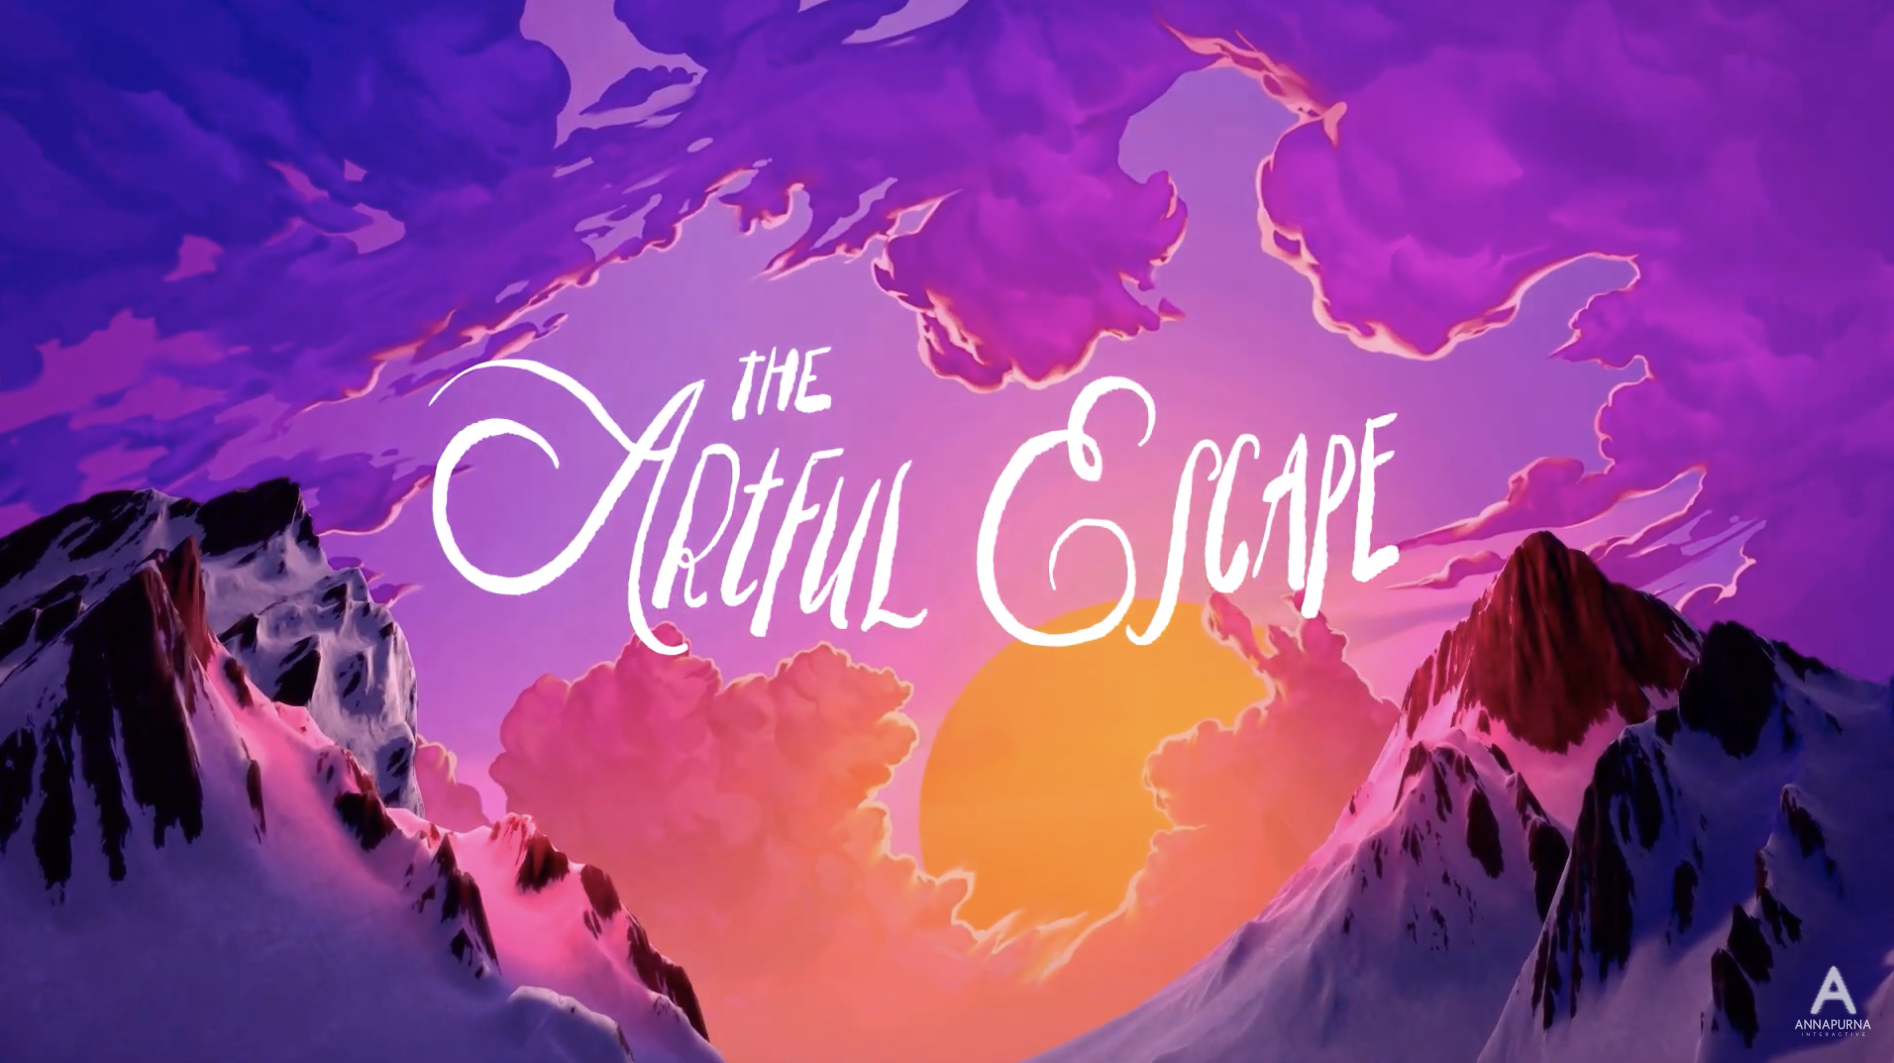 Check Out this Glorious New â€˜The Artful Escapeâ€™ Trailer, Coming to Apple Arcade in 2020